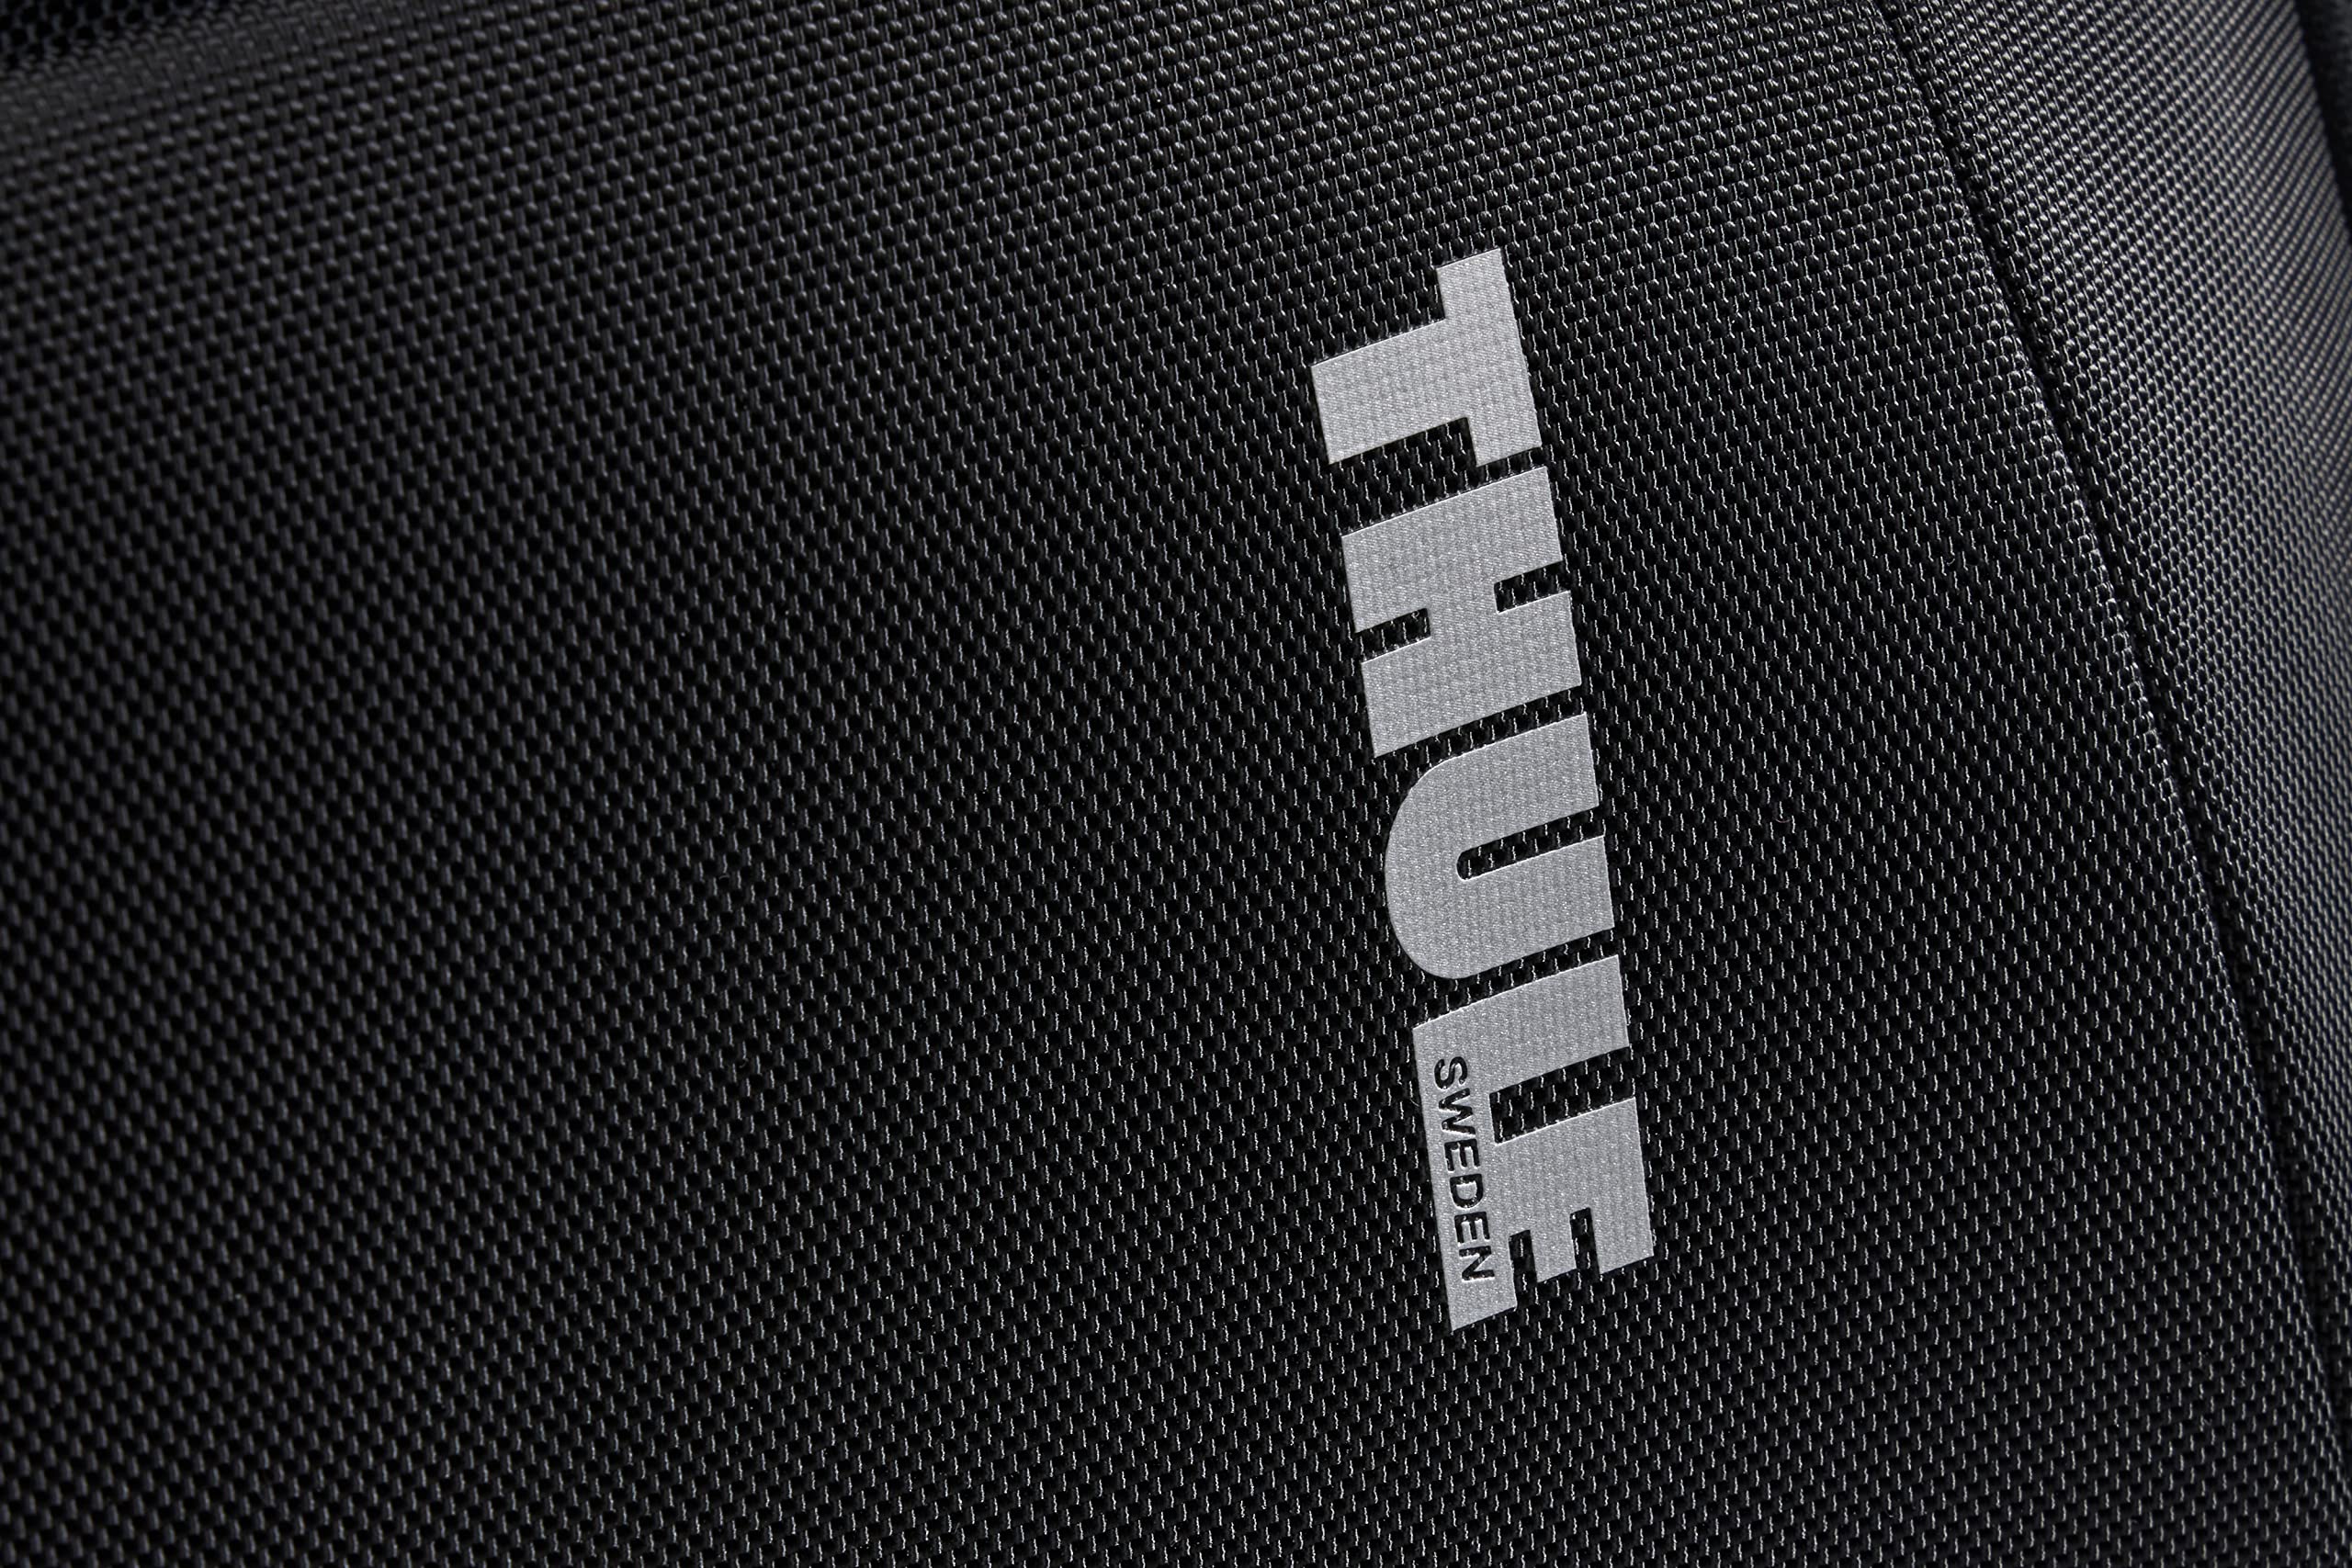 Thule Accent 15.6